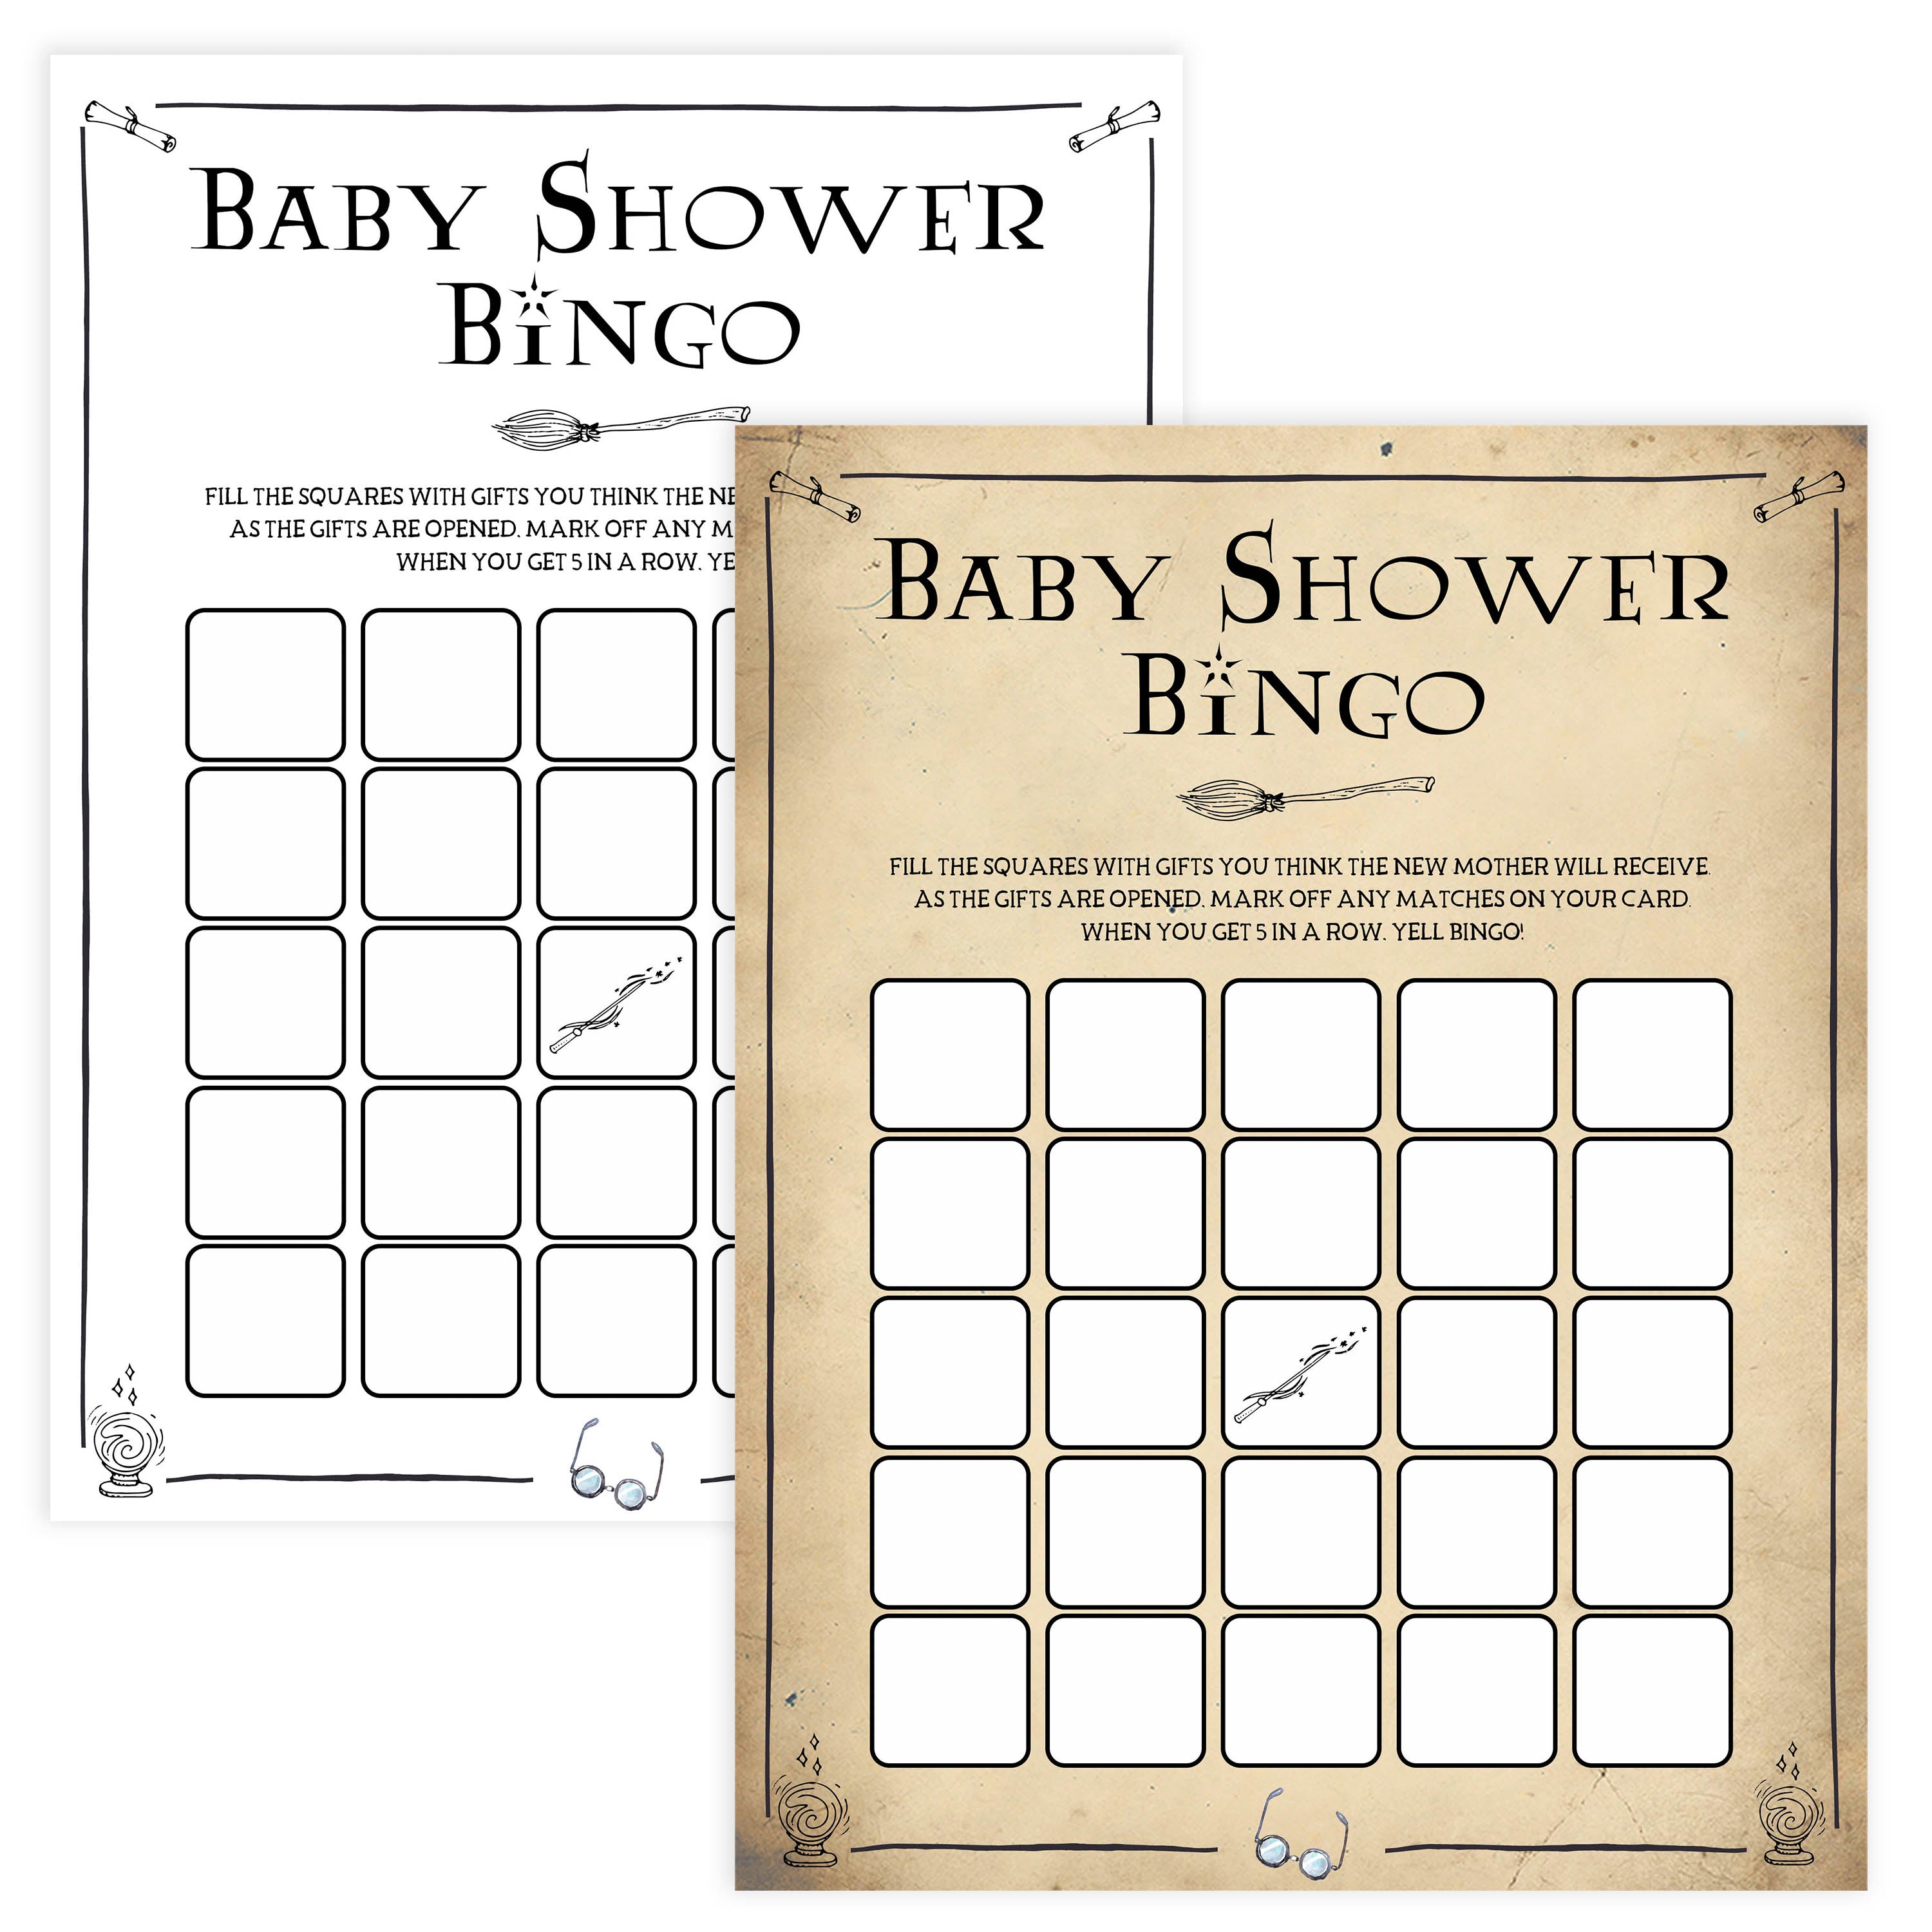 Baby Shower Bingo - Wizard Printable Baby Shower Games – OhHappyPrintables